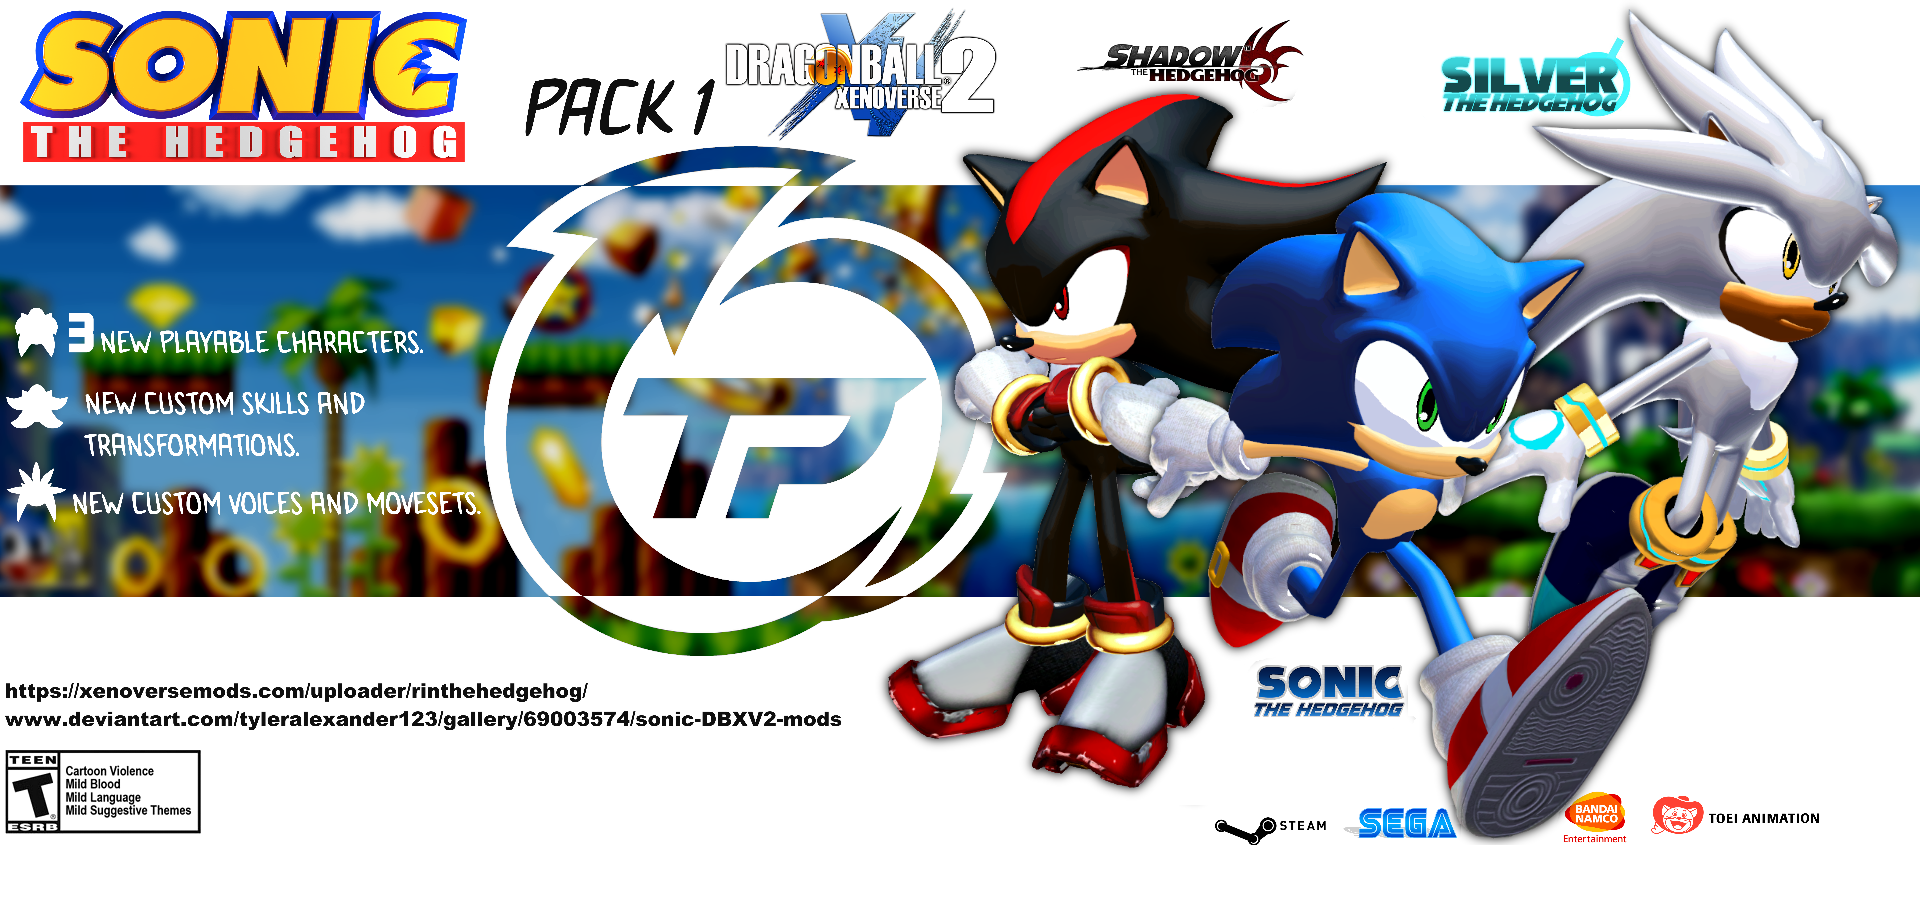 Sonic The Hedgehog Mod Pack 1: Sonic, Shadow and Silver